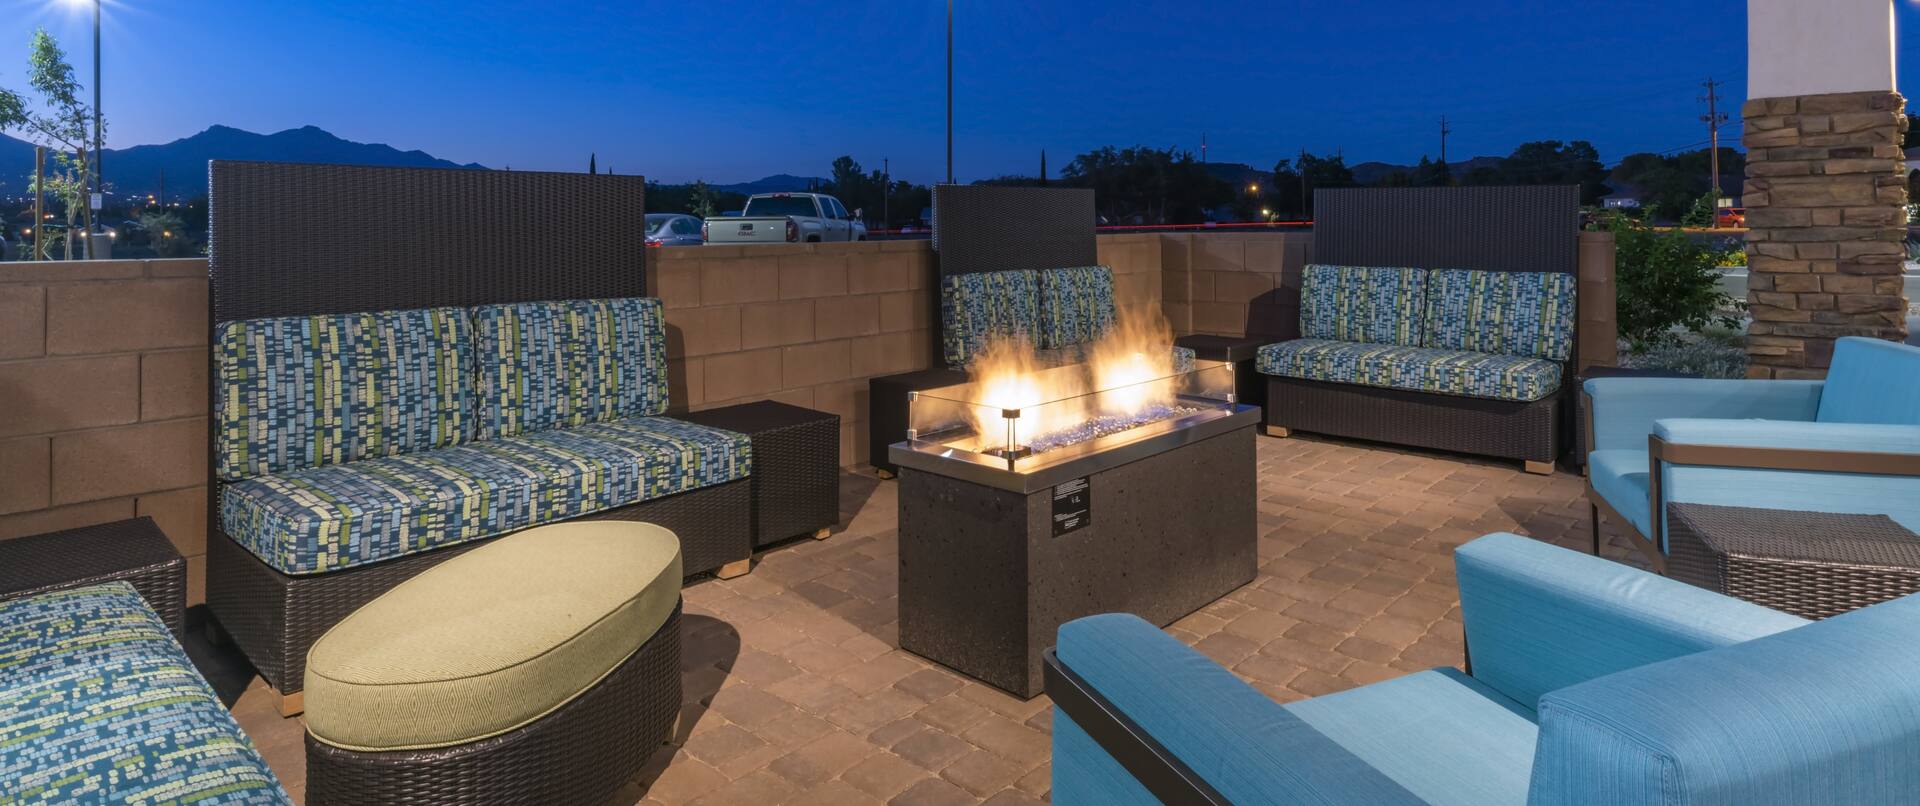 Outdoor Patio Area with Soft Chairs, Footrest and Soft Armchairs at Night